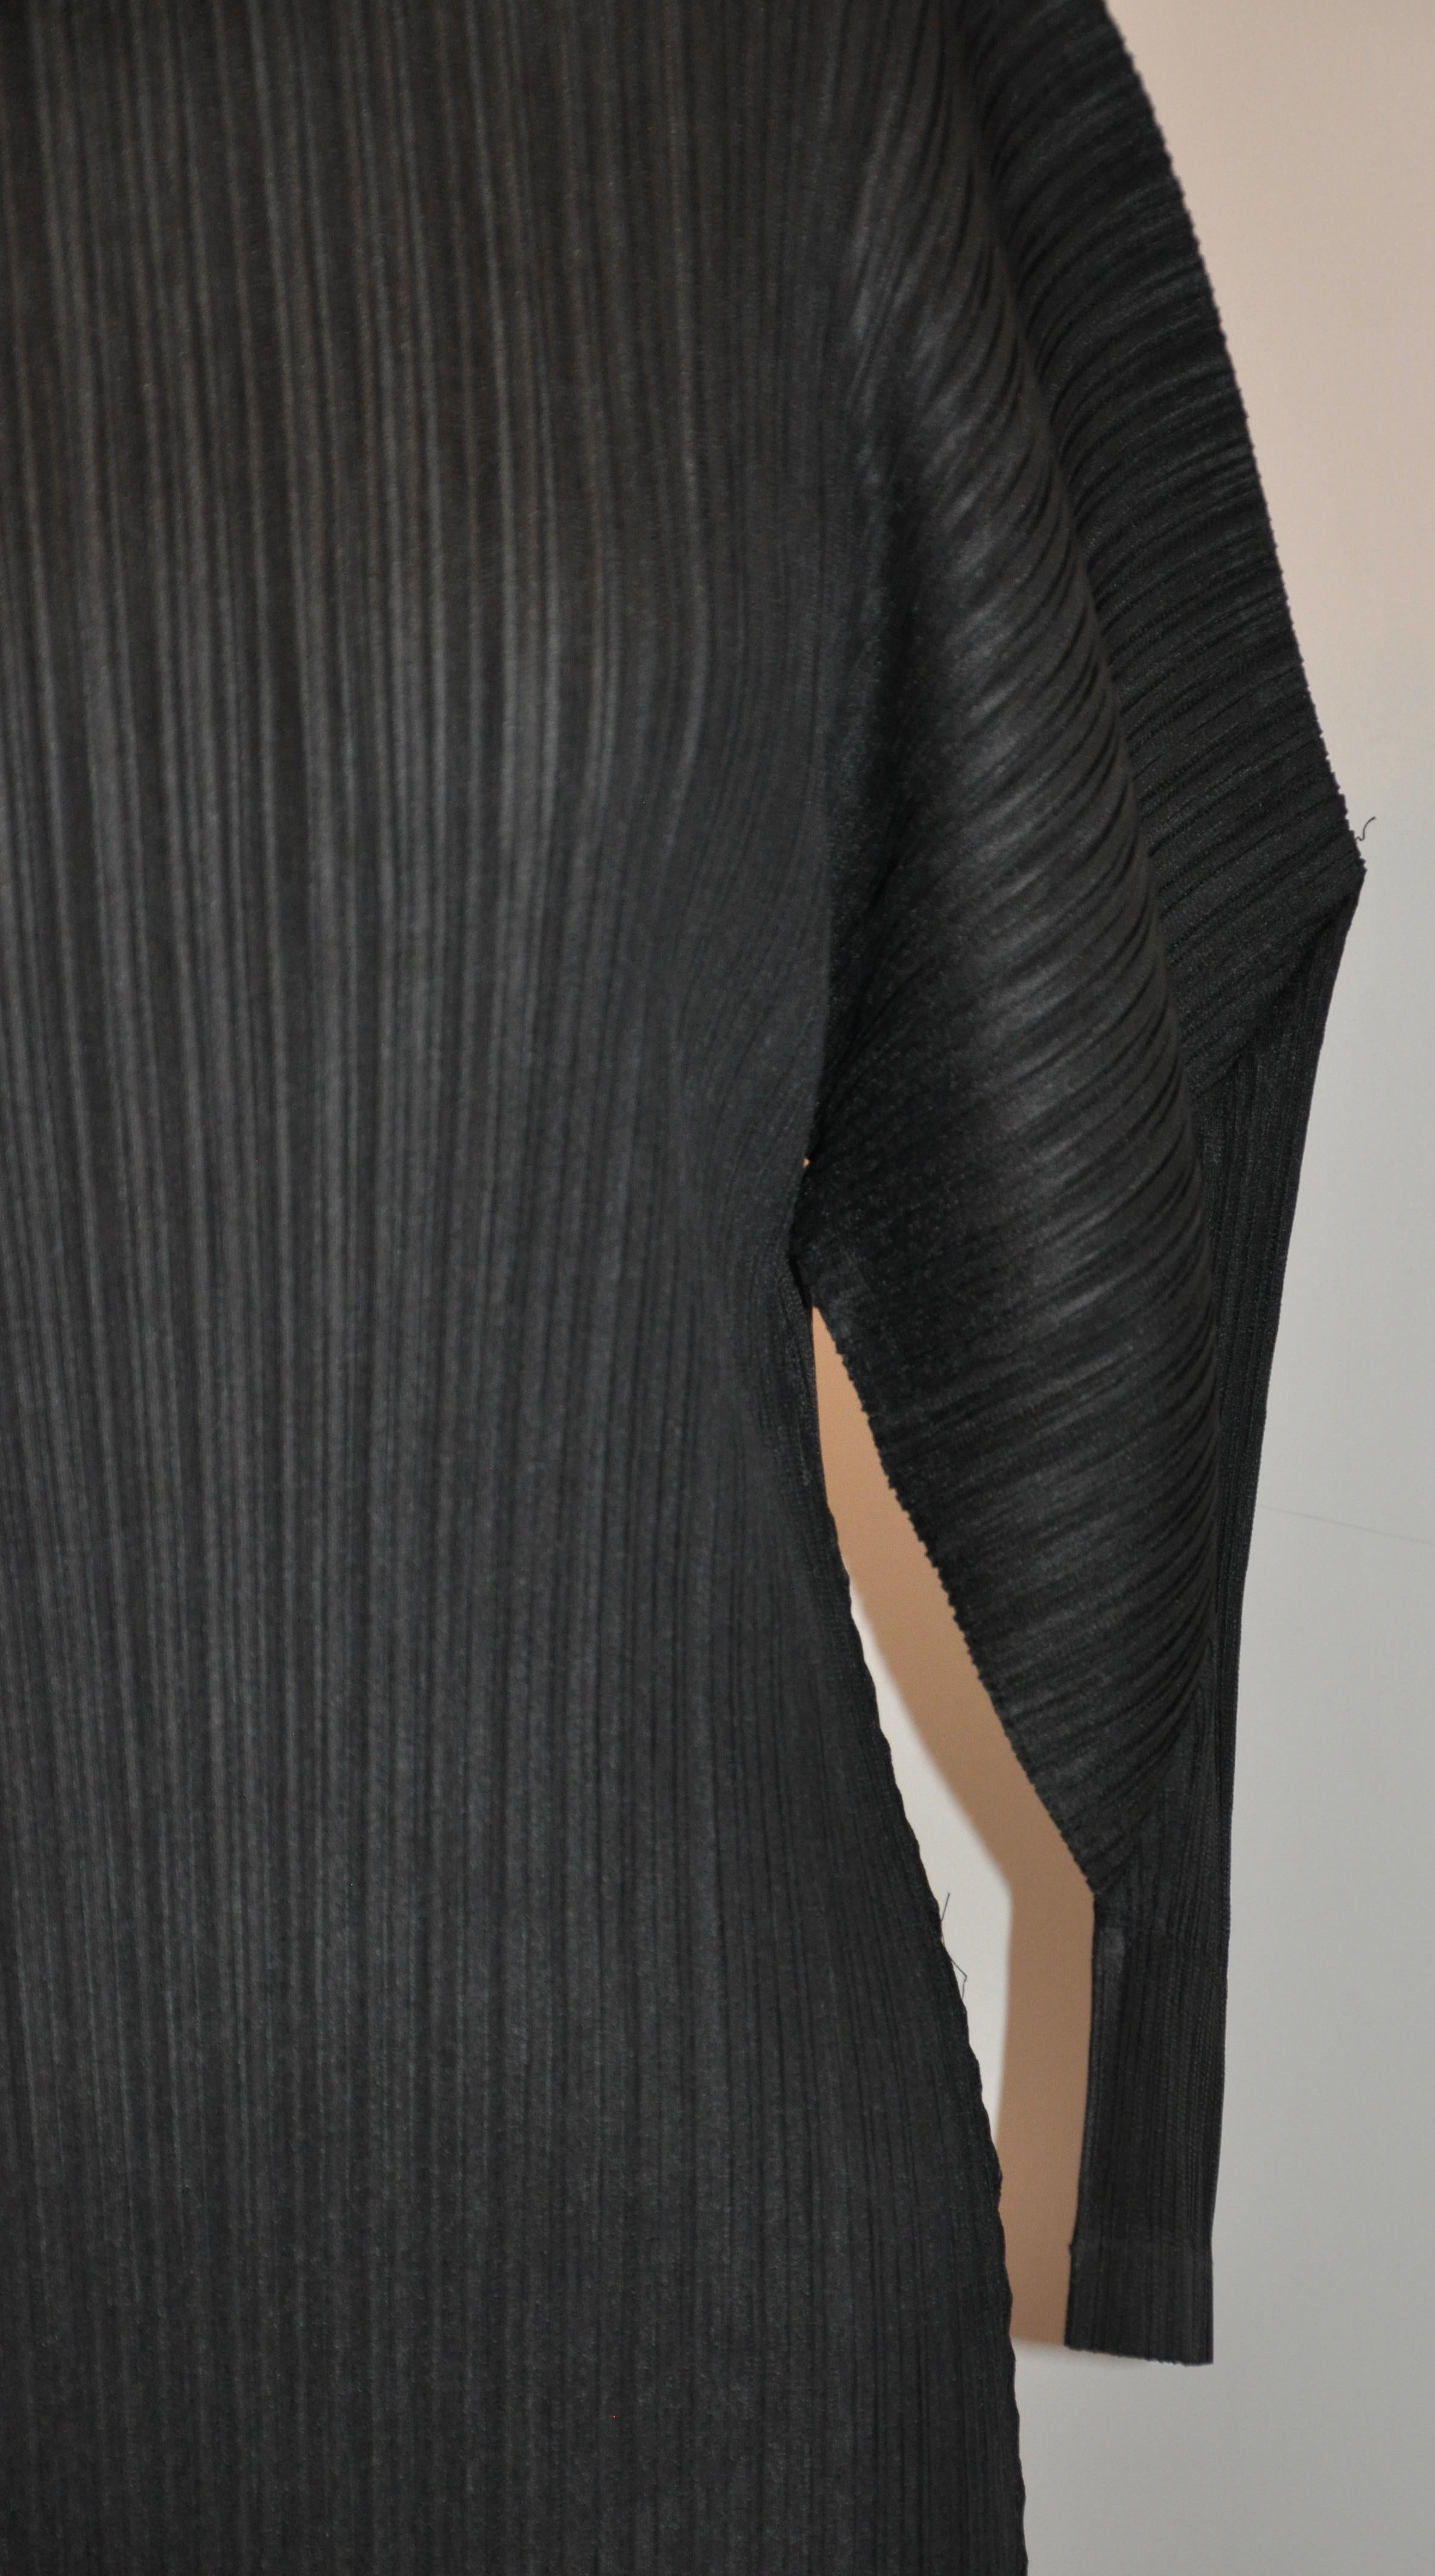 Issey Miyake Iconic Signature Jet-Black High-Neck Pullover Dress In Good Condition For Sale In New York, NY